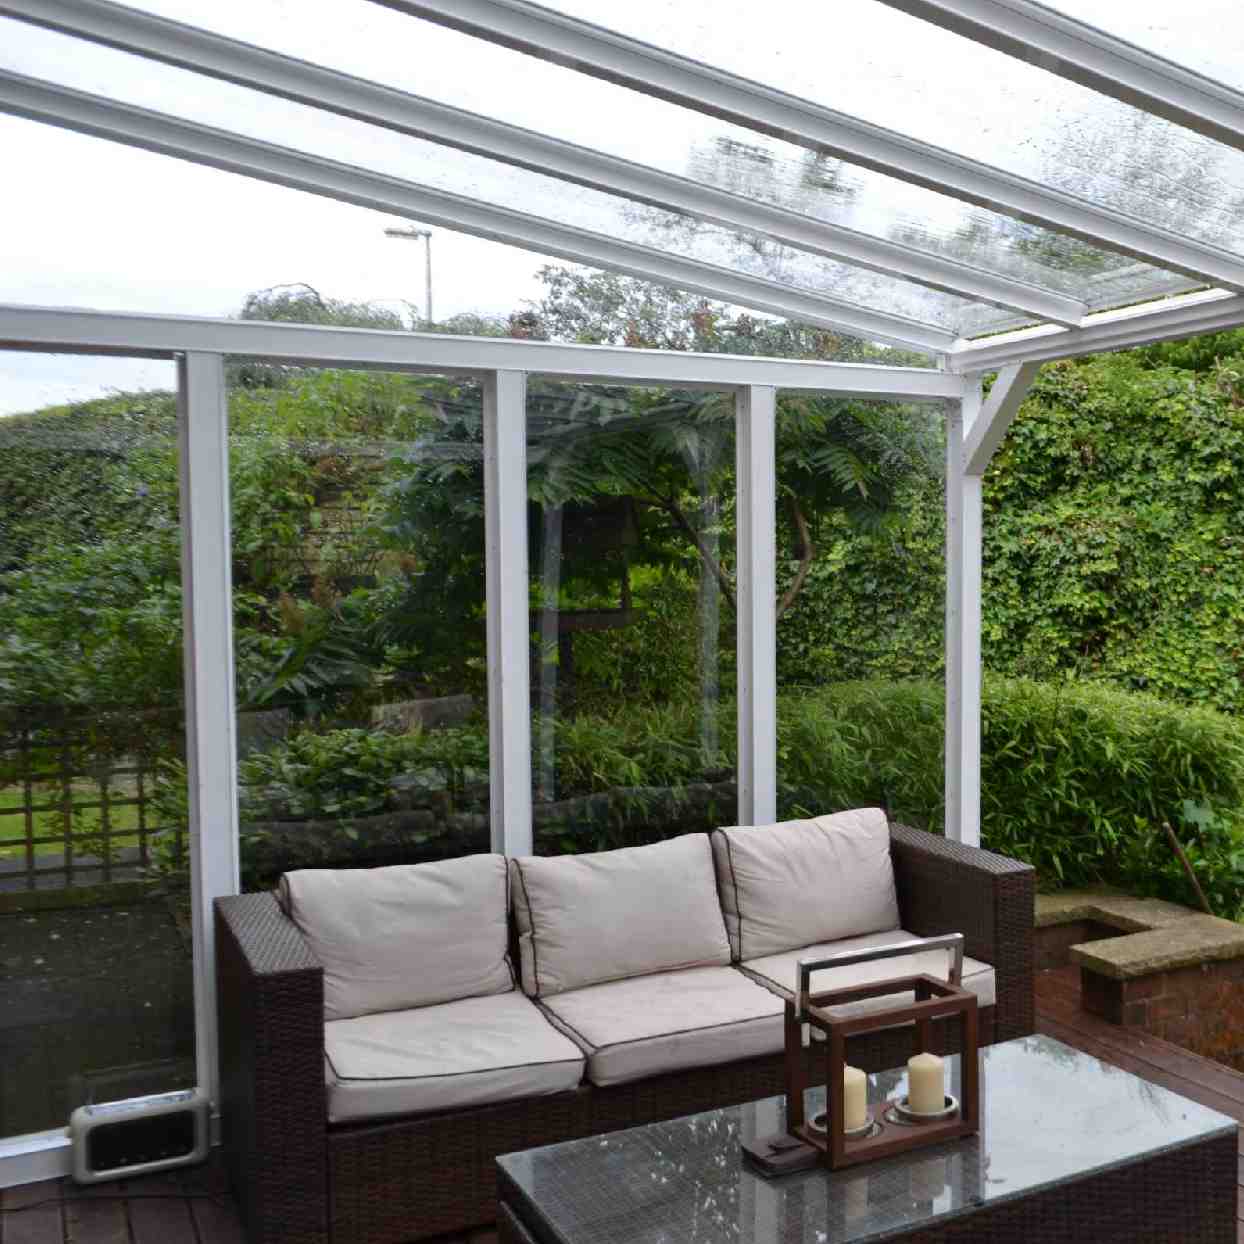 Buy Omega Verandah White with 6mm Glass Clear Plate Polycarbonate Glazing - 4.2m (W) x 4.0m (P), (3) Supporting Posts online today